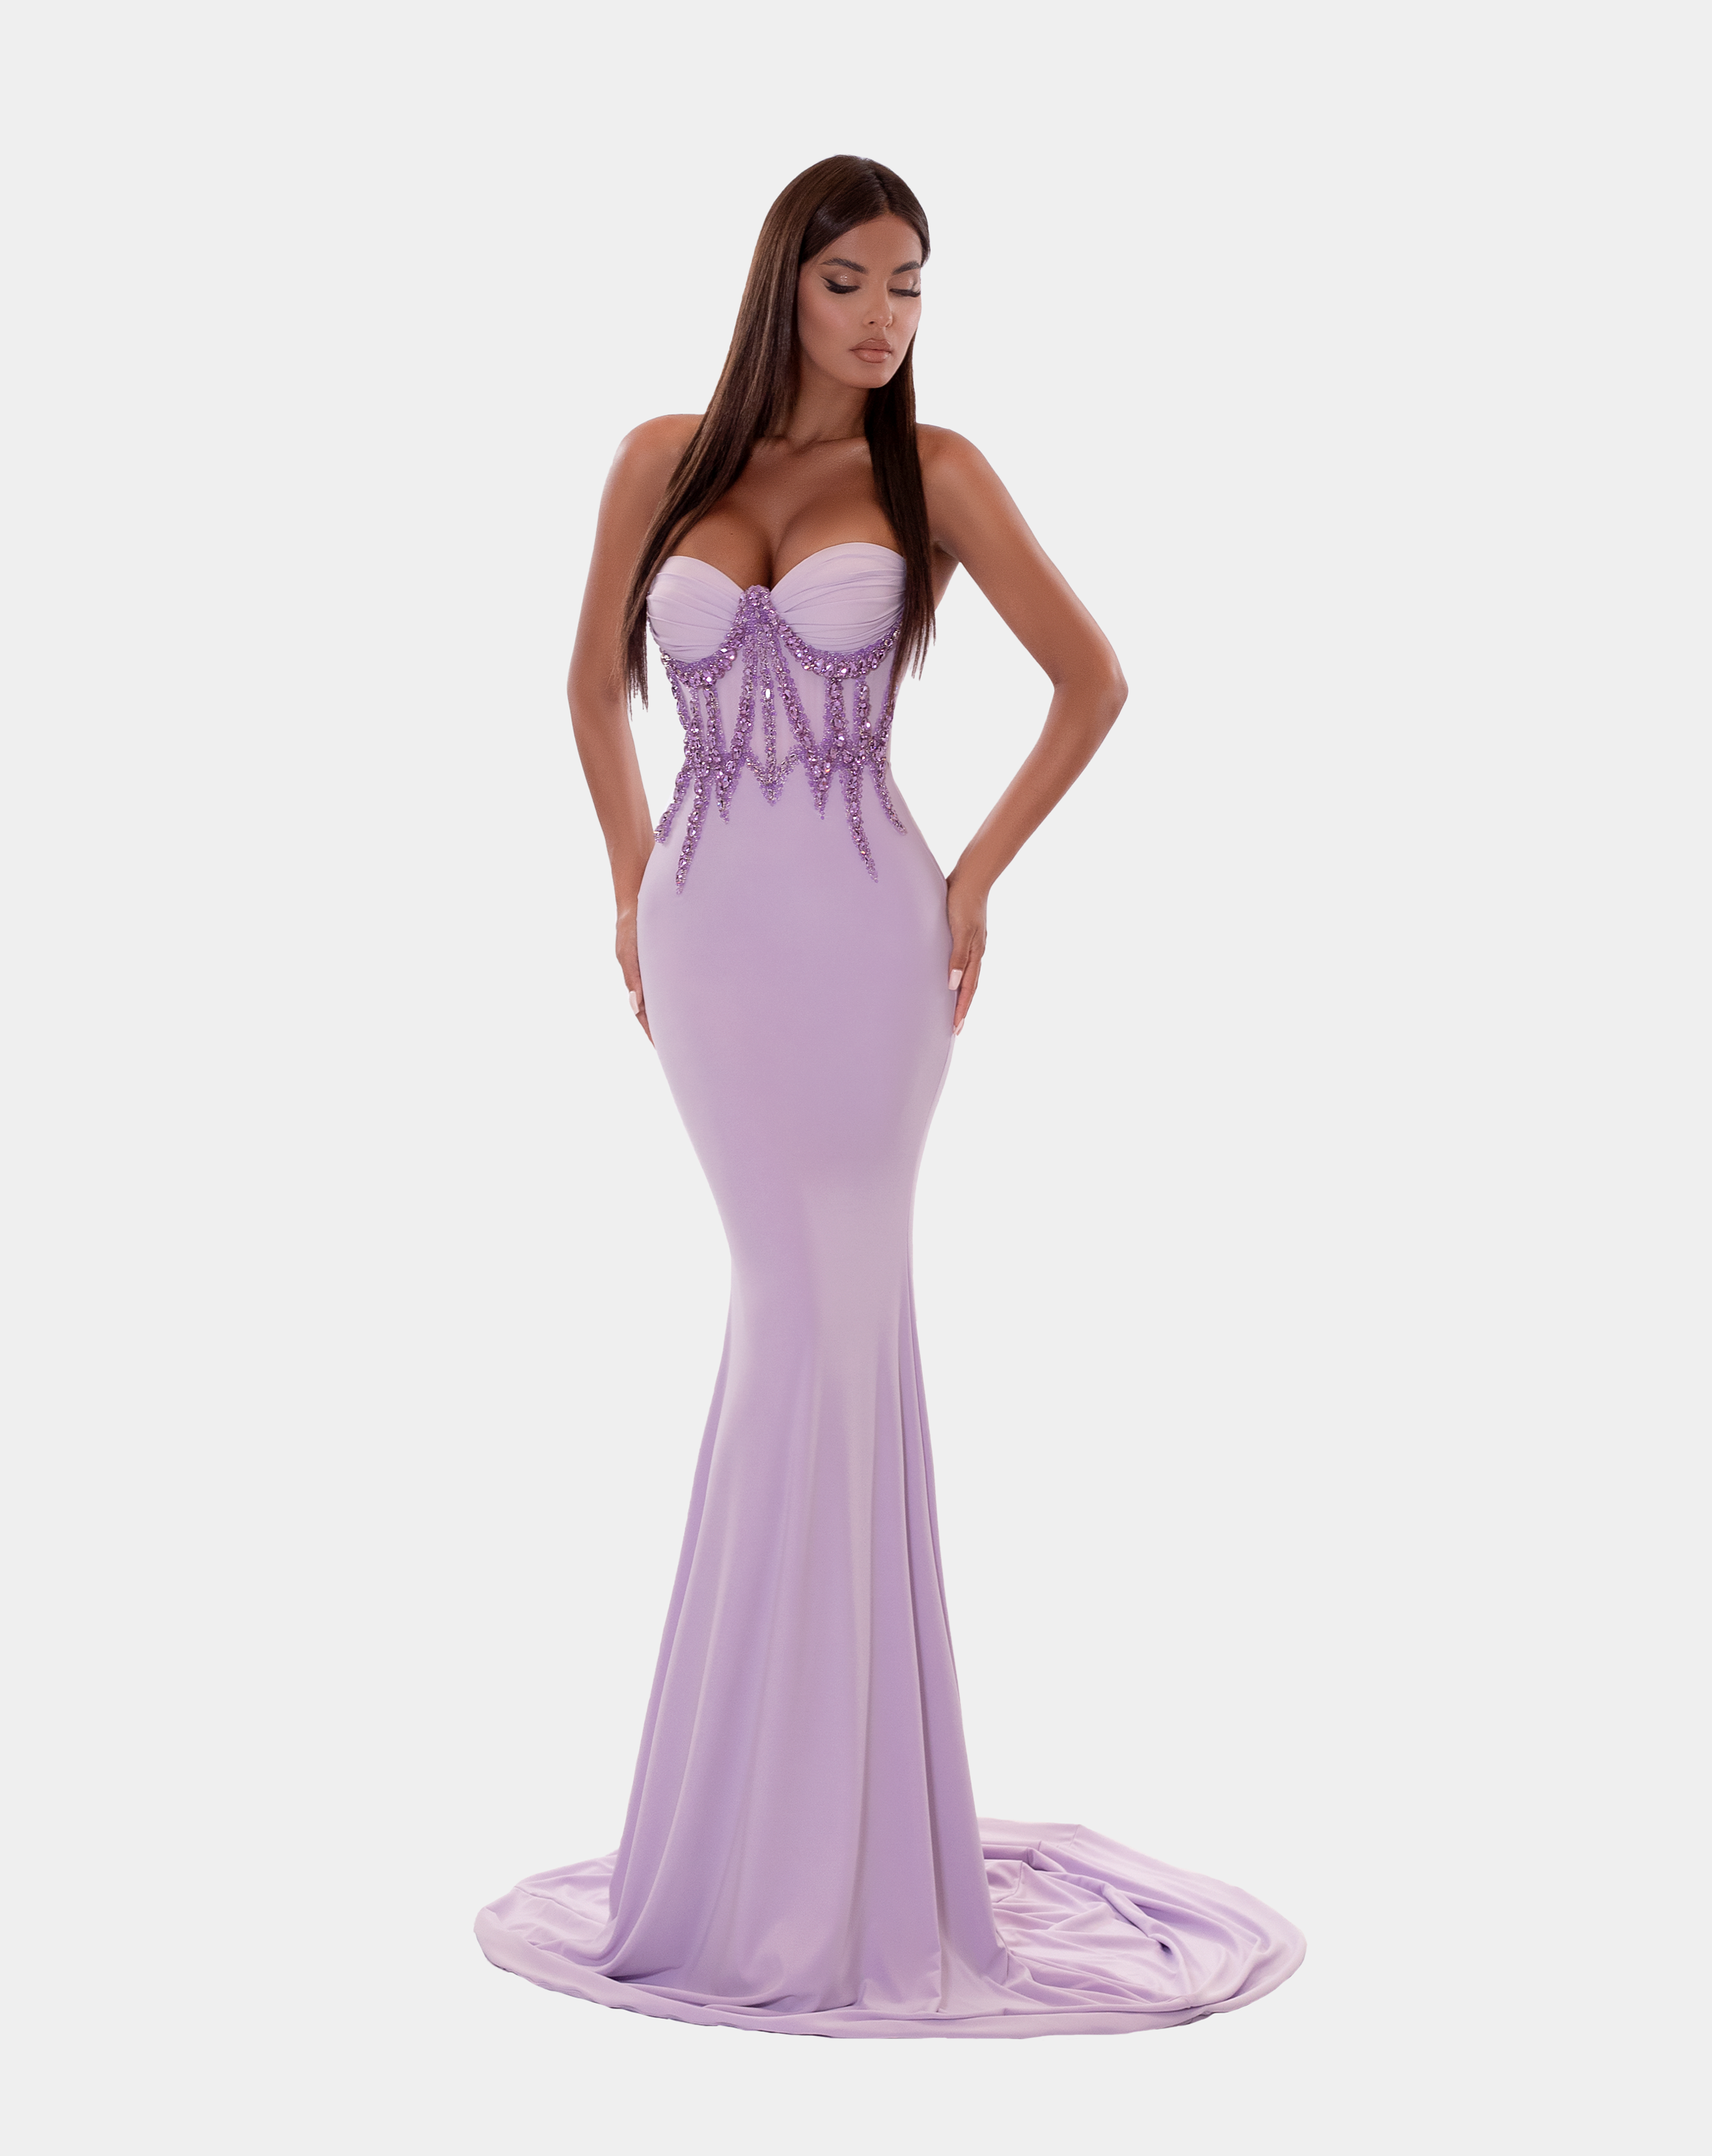 EMBELLISHED CORSET LONG DRESS IN LILAC – ALBINA DYLA